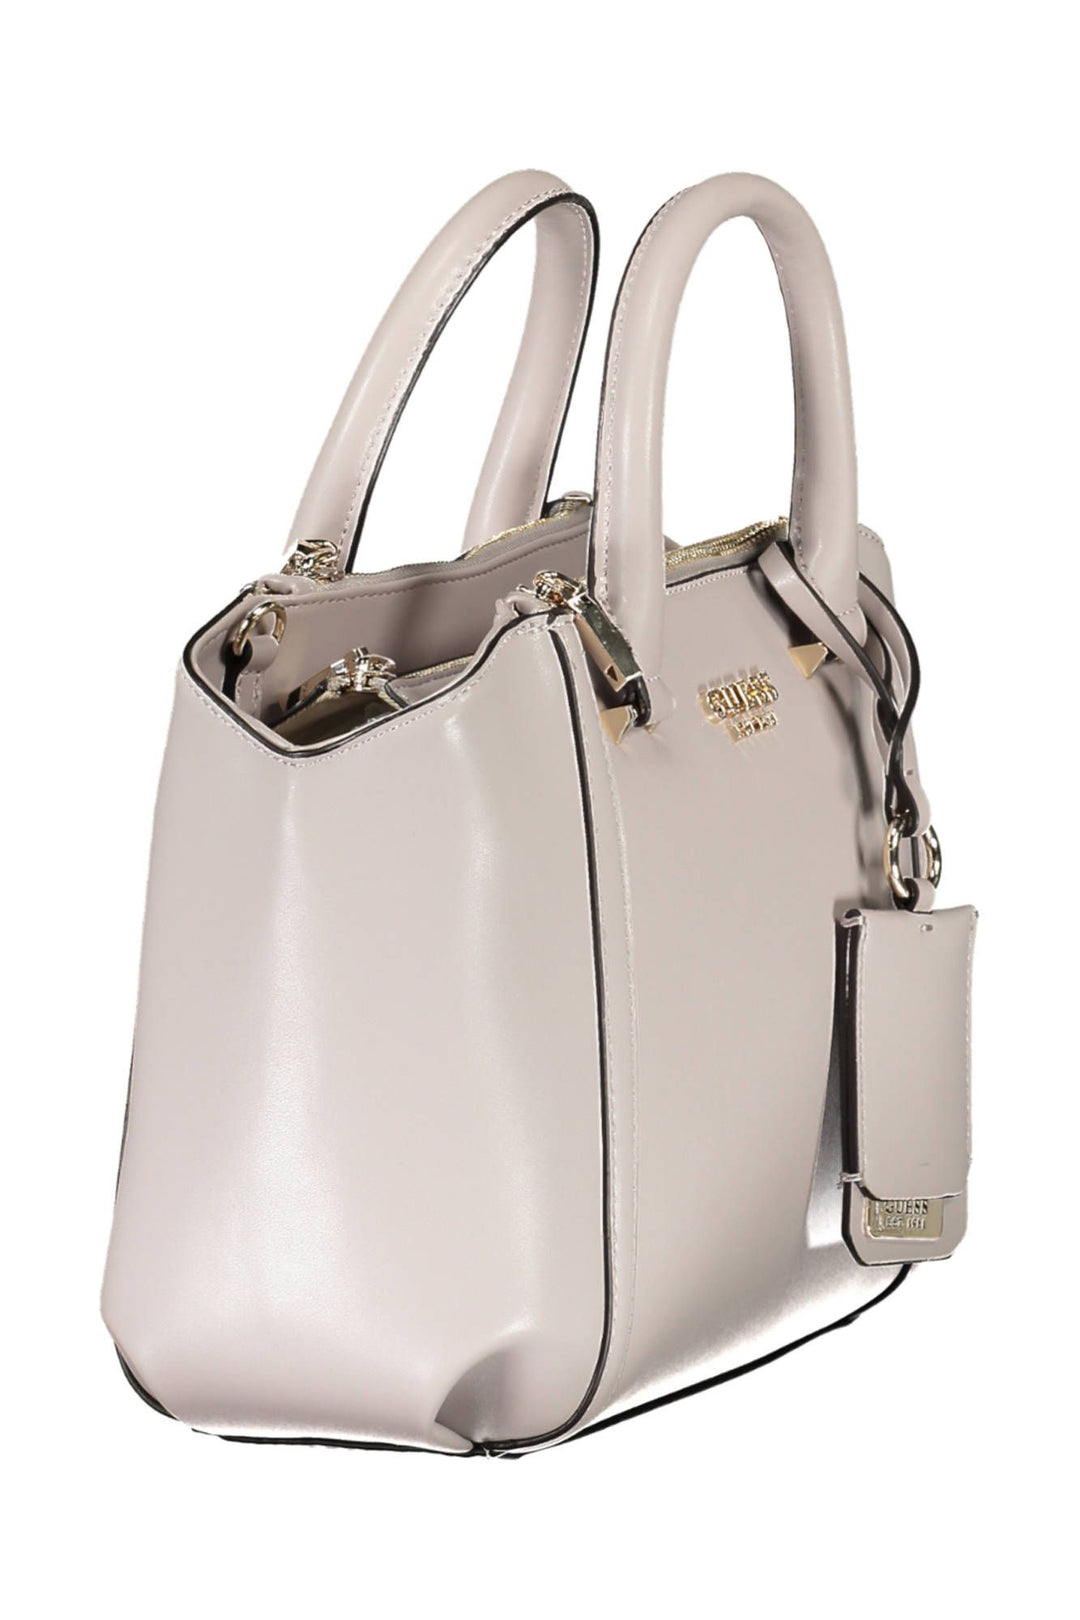 Guess Jeans Elegant Gray Handbag with Contrasting Accents